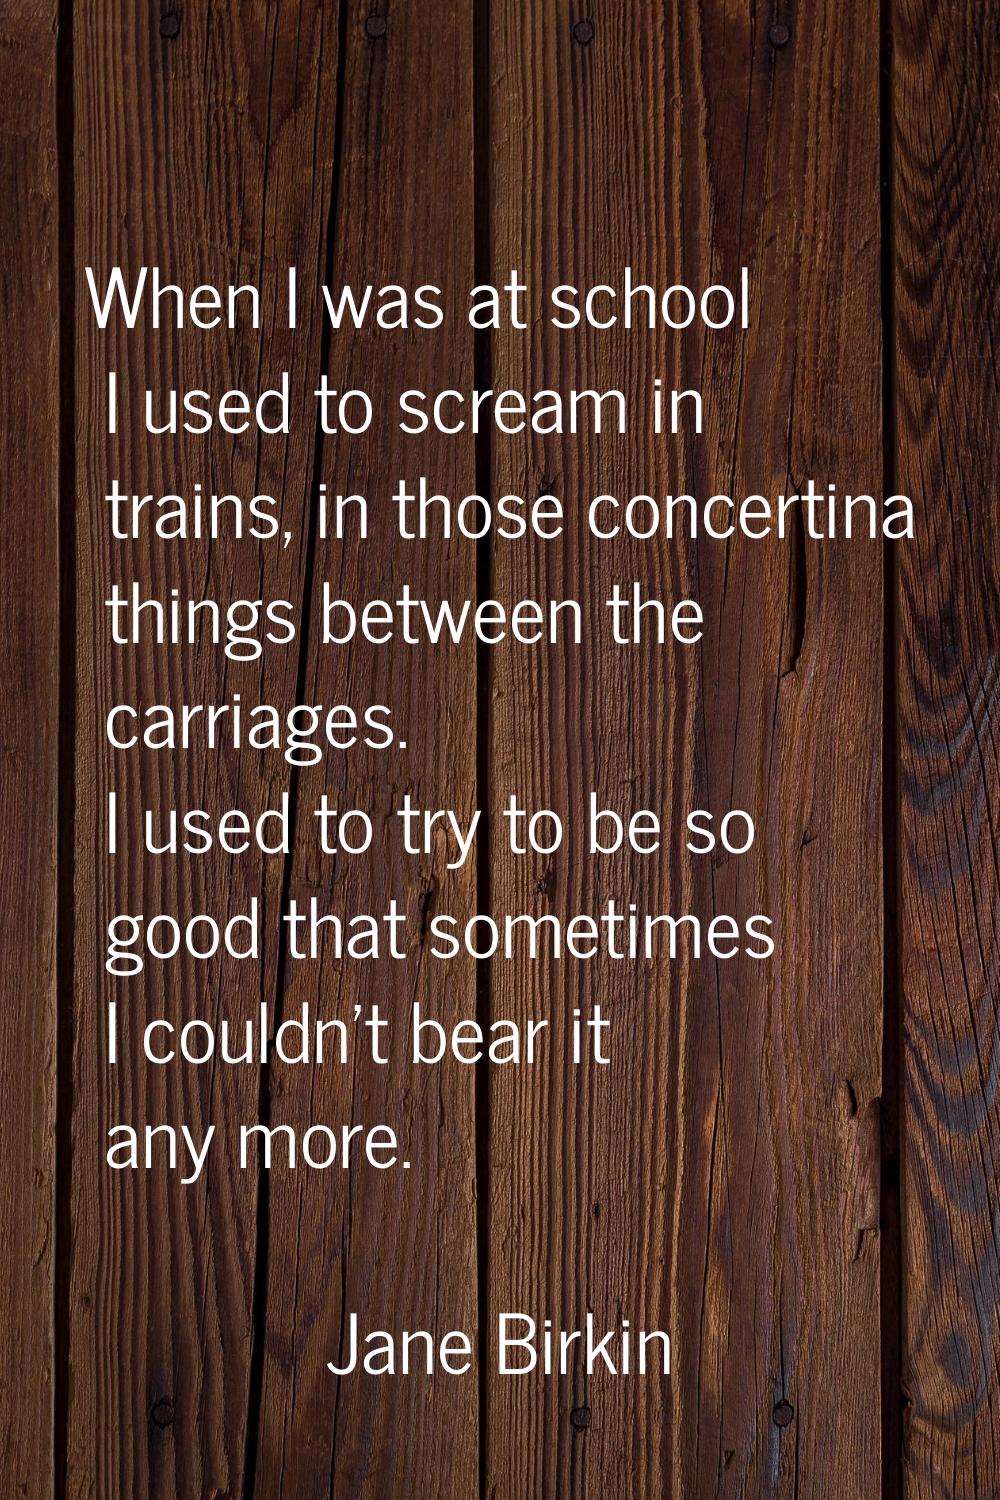 When I was at school I used to scream in trains, in those concertina things between the carriages. 